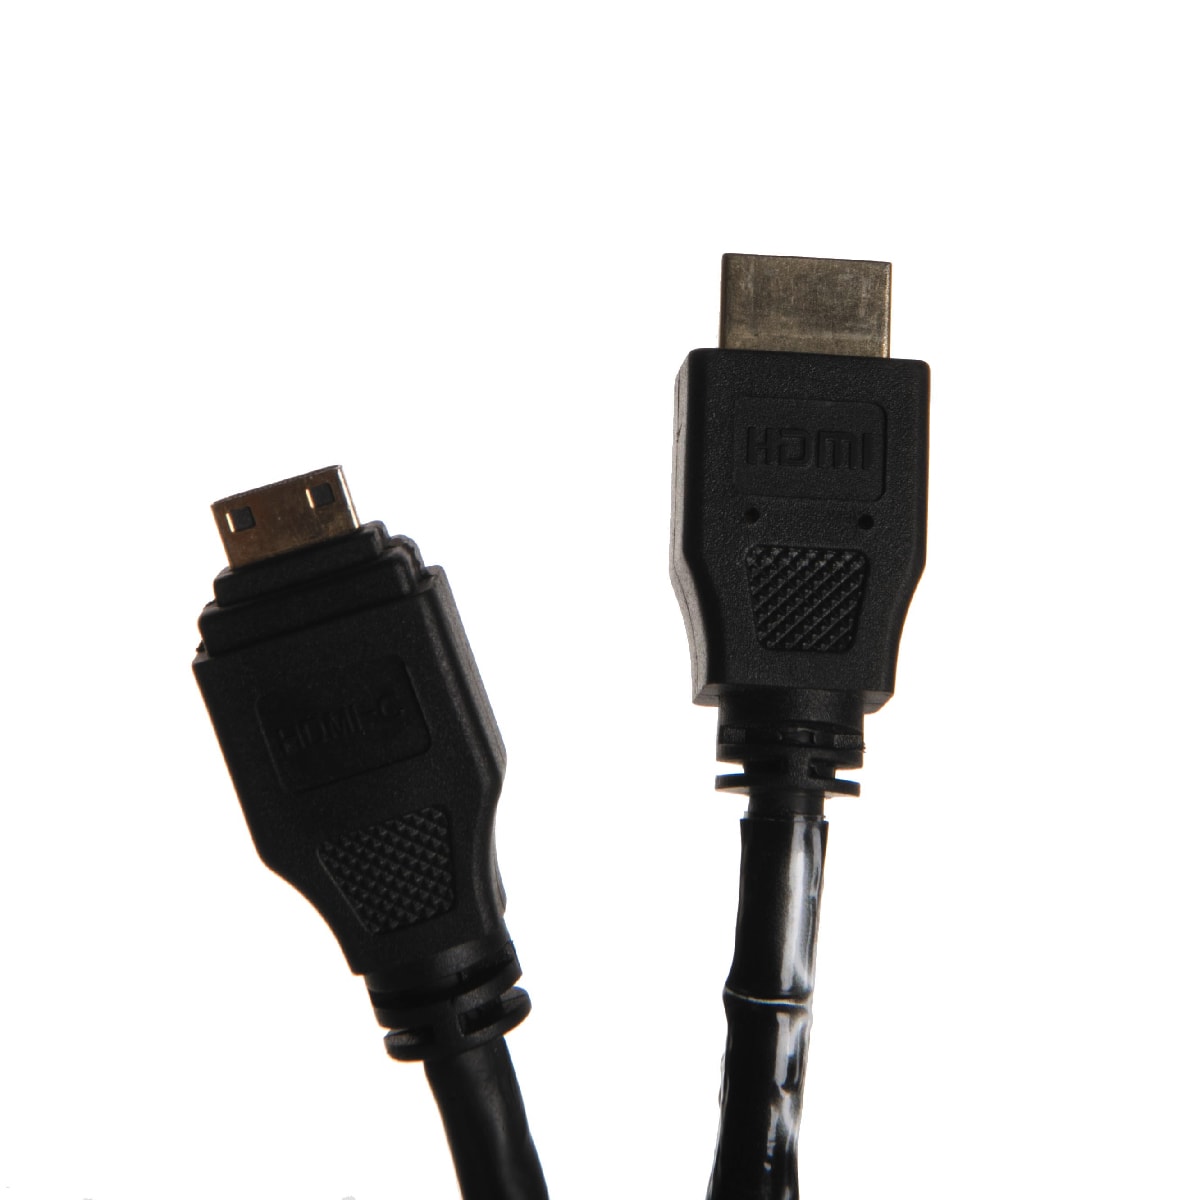  HDMI cable (small to normal plug, 10m)